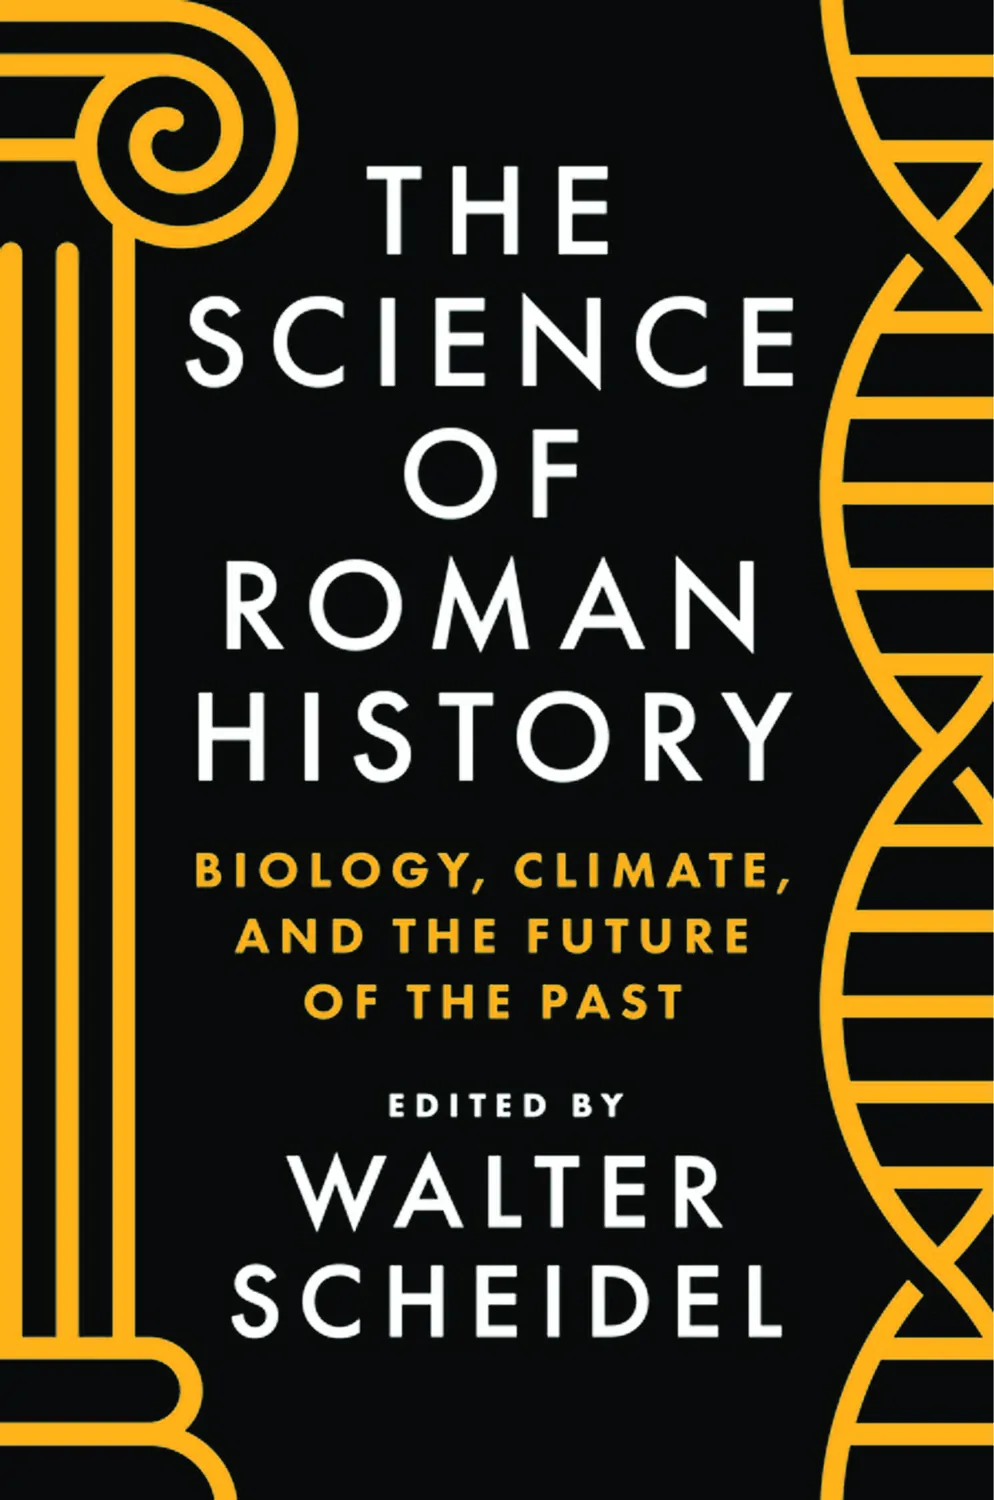 The Science of Roman History: Biology, Climate, and the Future of the Past